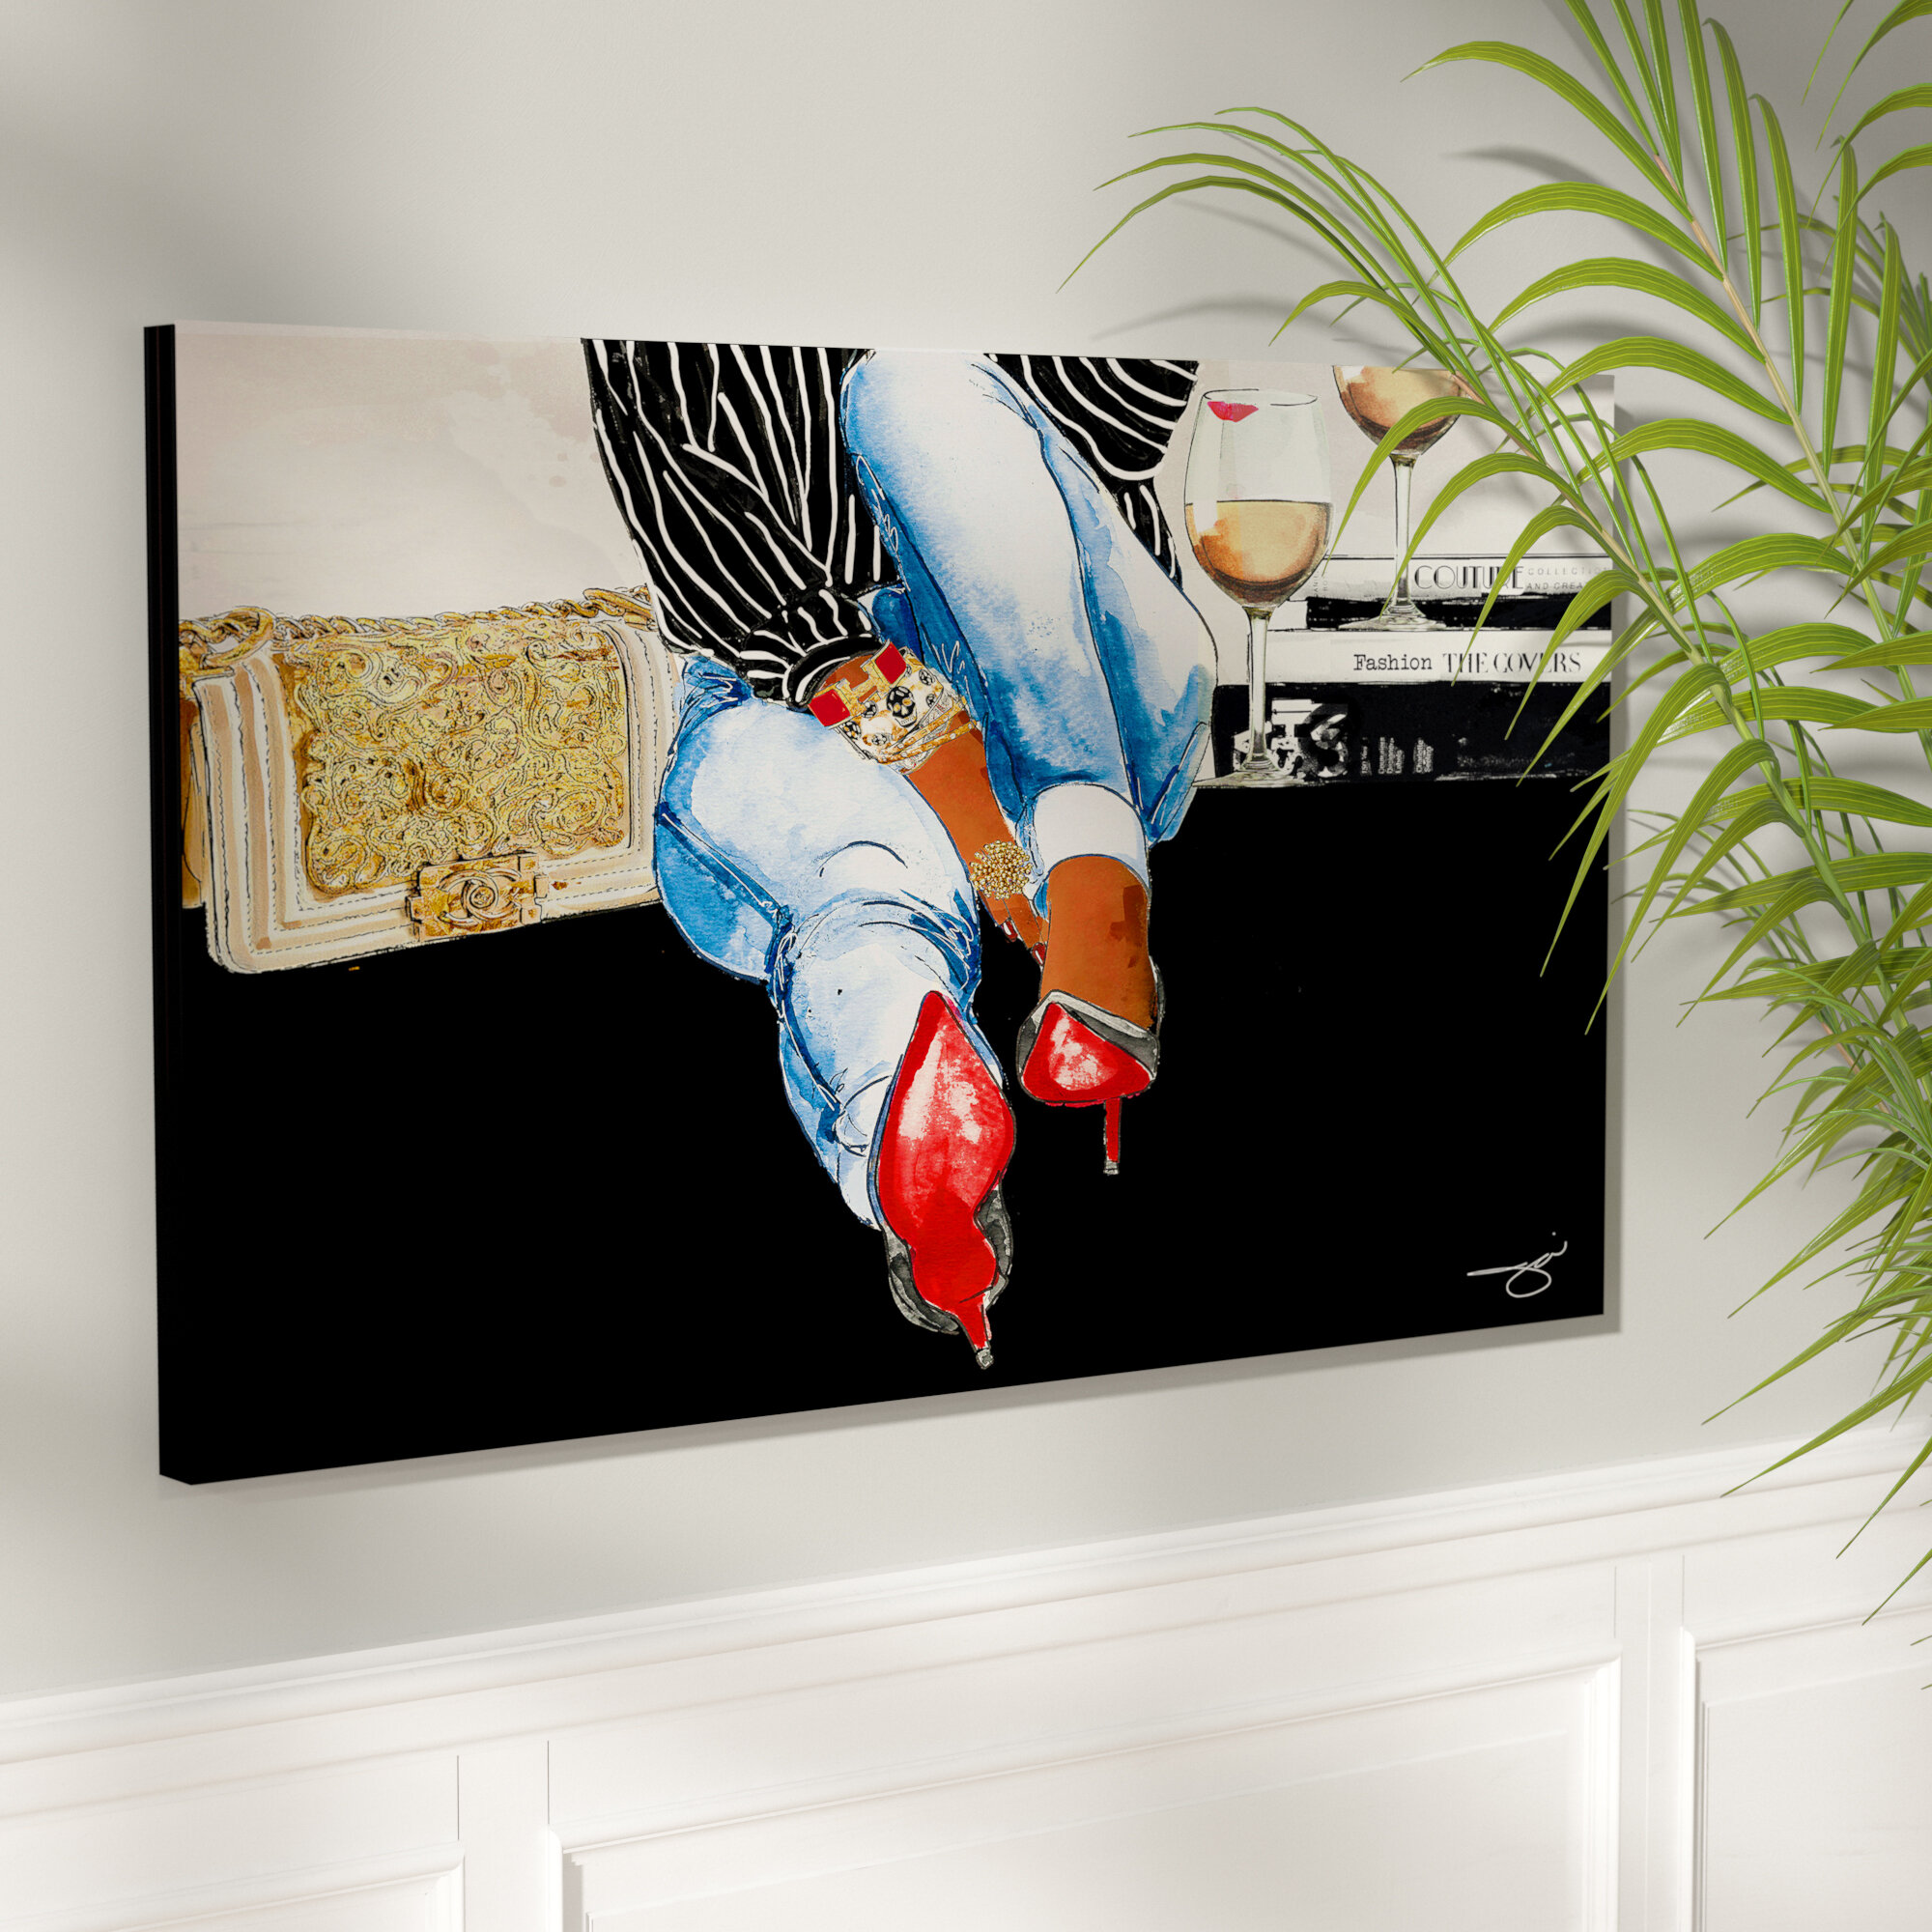 Waiting on You' Graphic Art Print on Wrapped Canvas House of Hampton Size: 24 H x 40 W